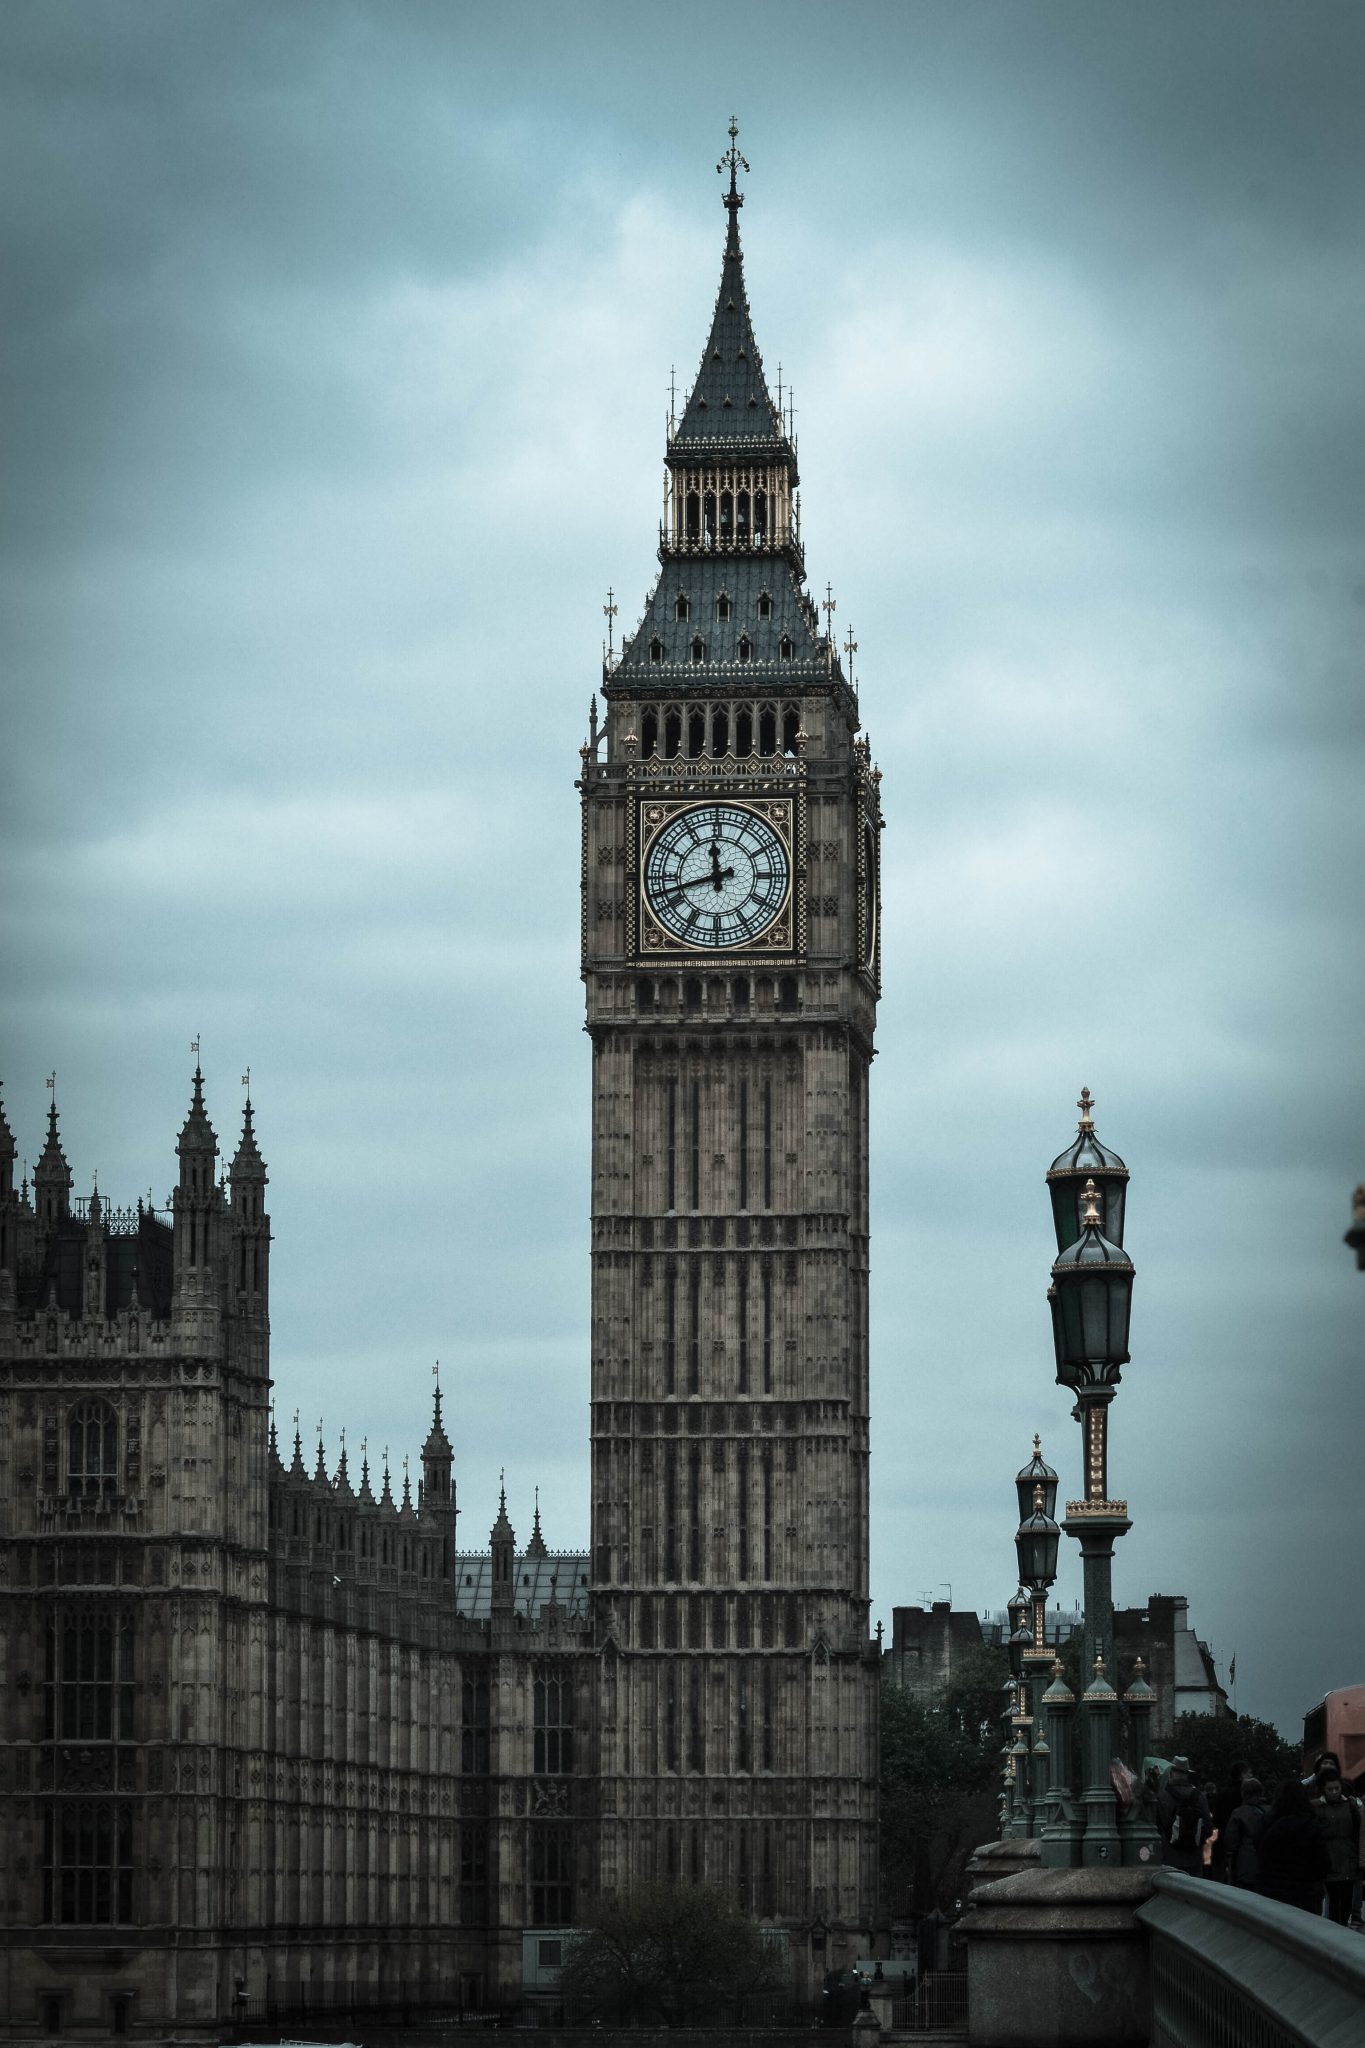 An image of Big Ben and the Parliament building in London. The iconic clocktower stands against a cloudy sky, and the image is filtered to give it a dark, hazy tone.